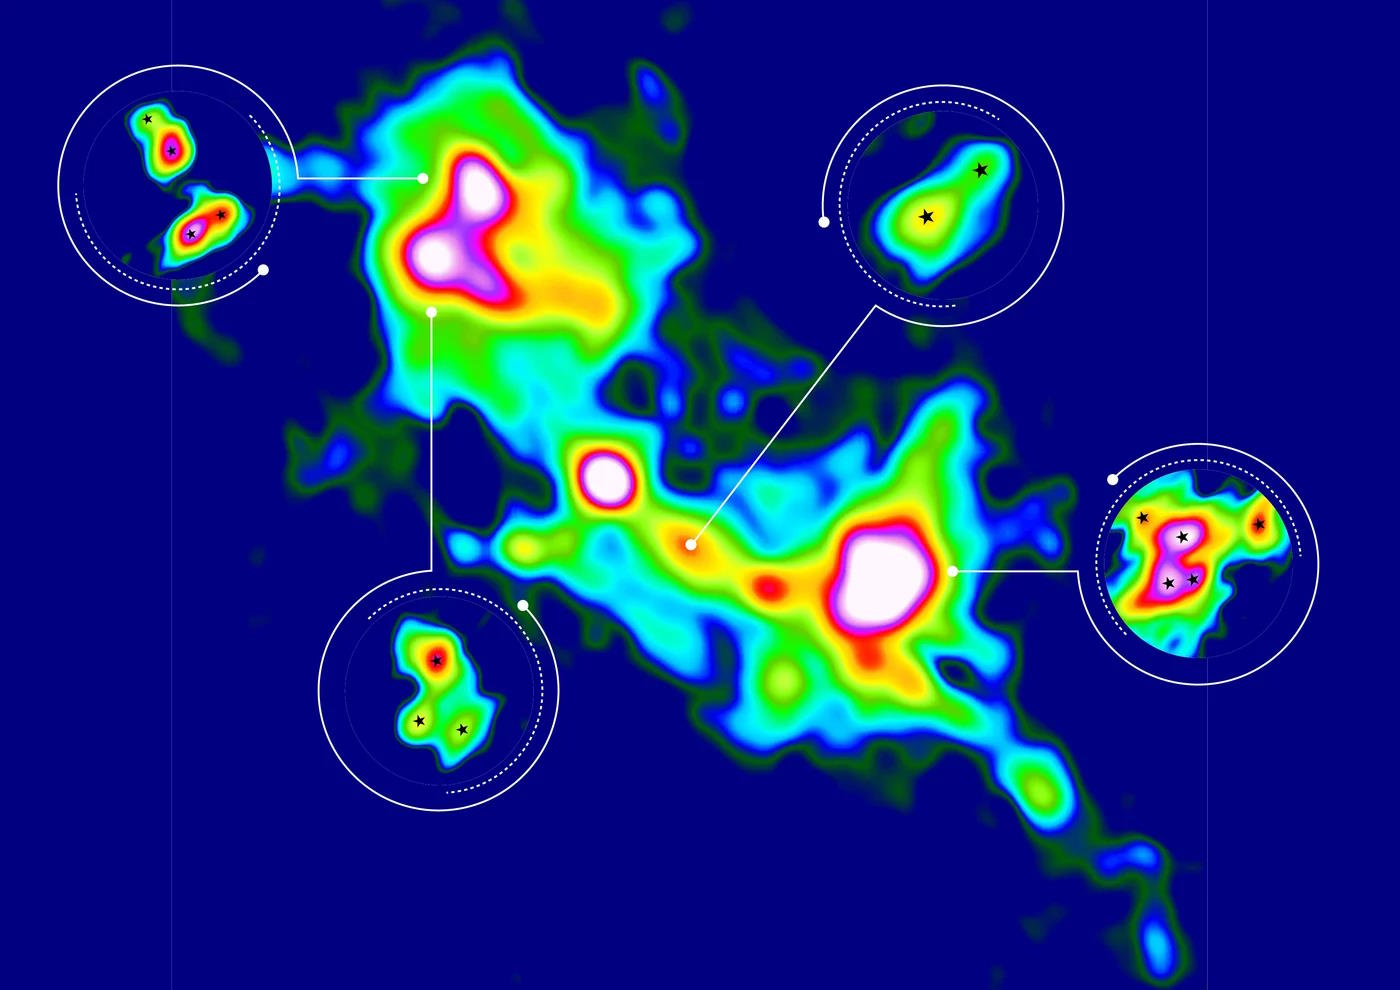 A map displaying the locations of various star birth areas.